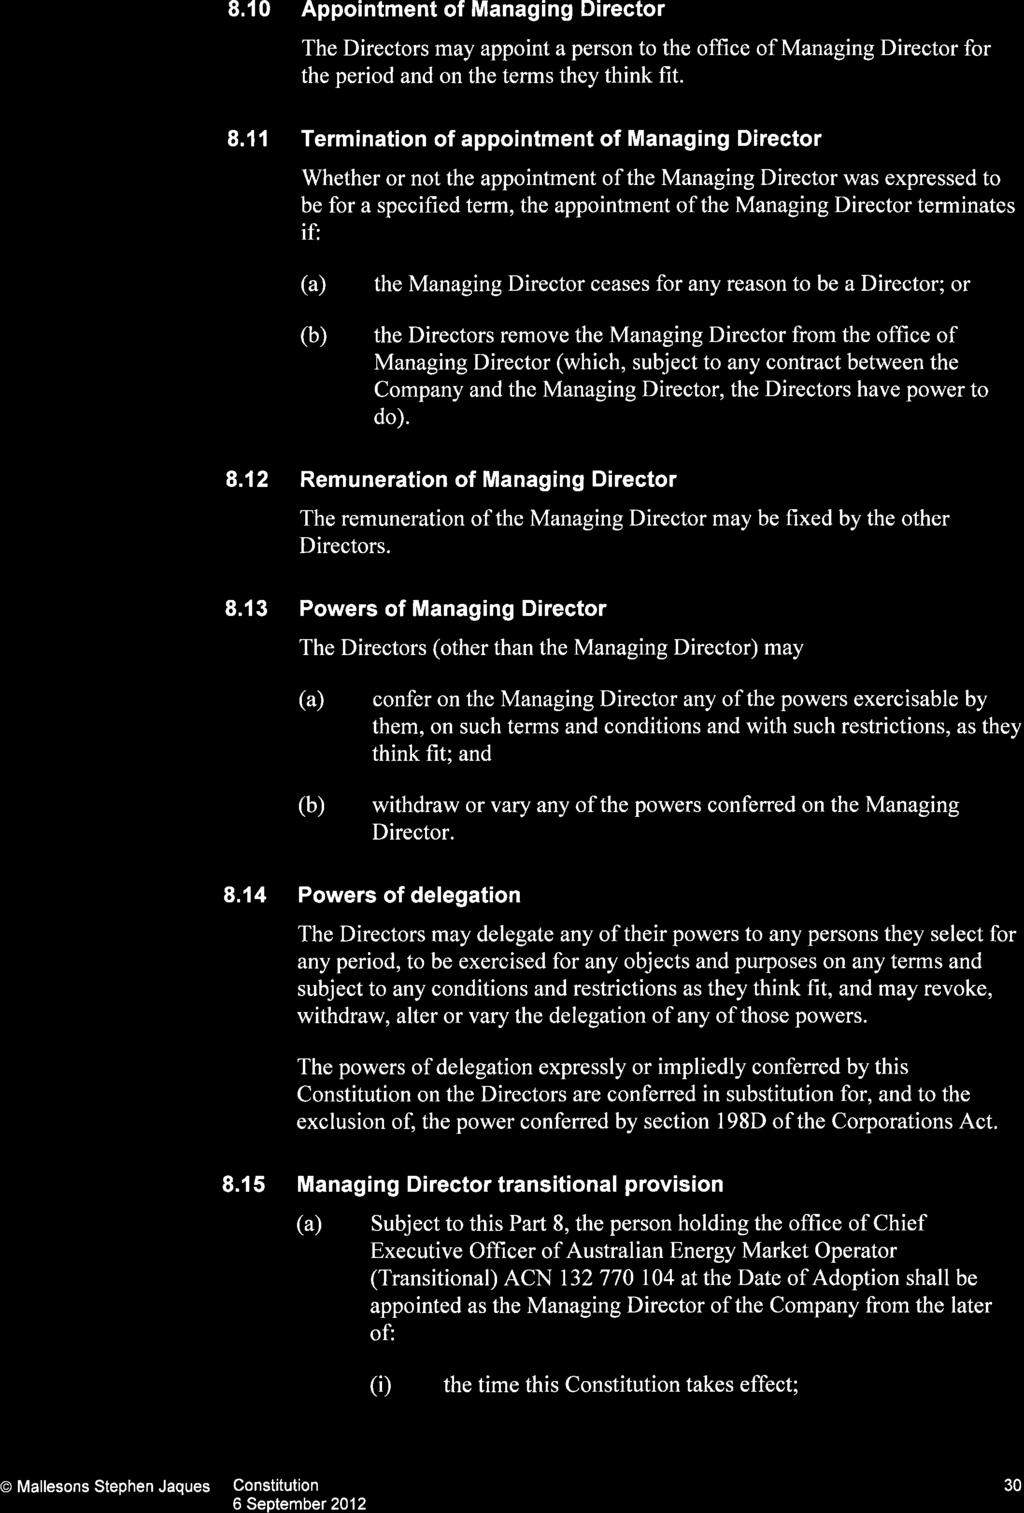 8.10 Appointment of Managing Director The Directors may appoint a person to the office of Managing Director for the period and on the terms they think fit. 8.